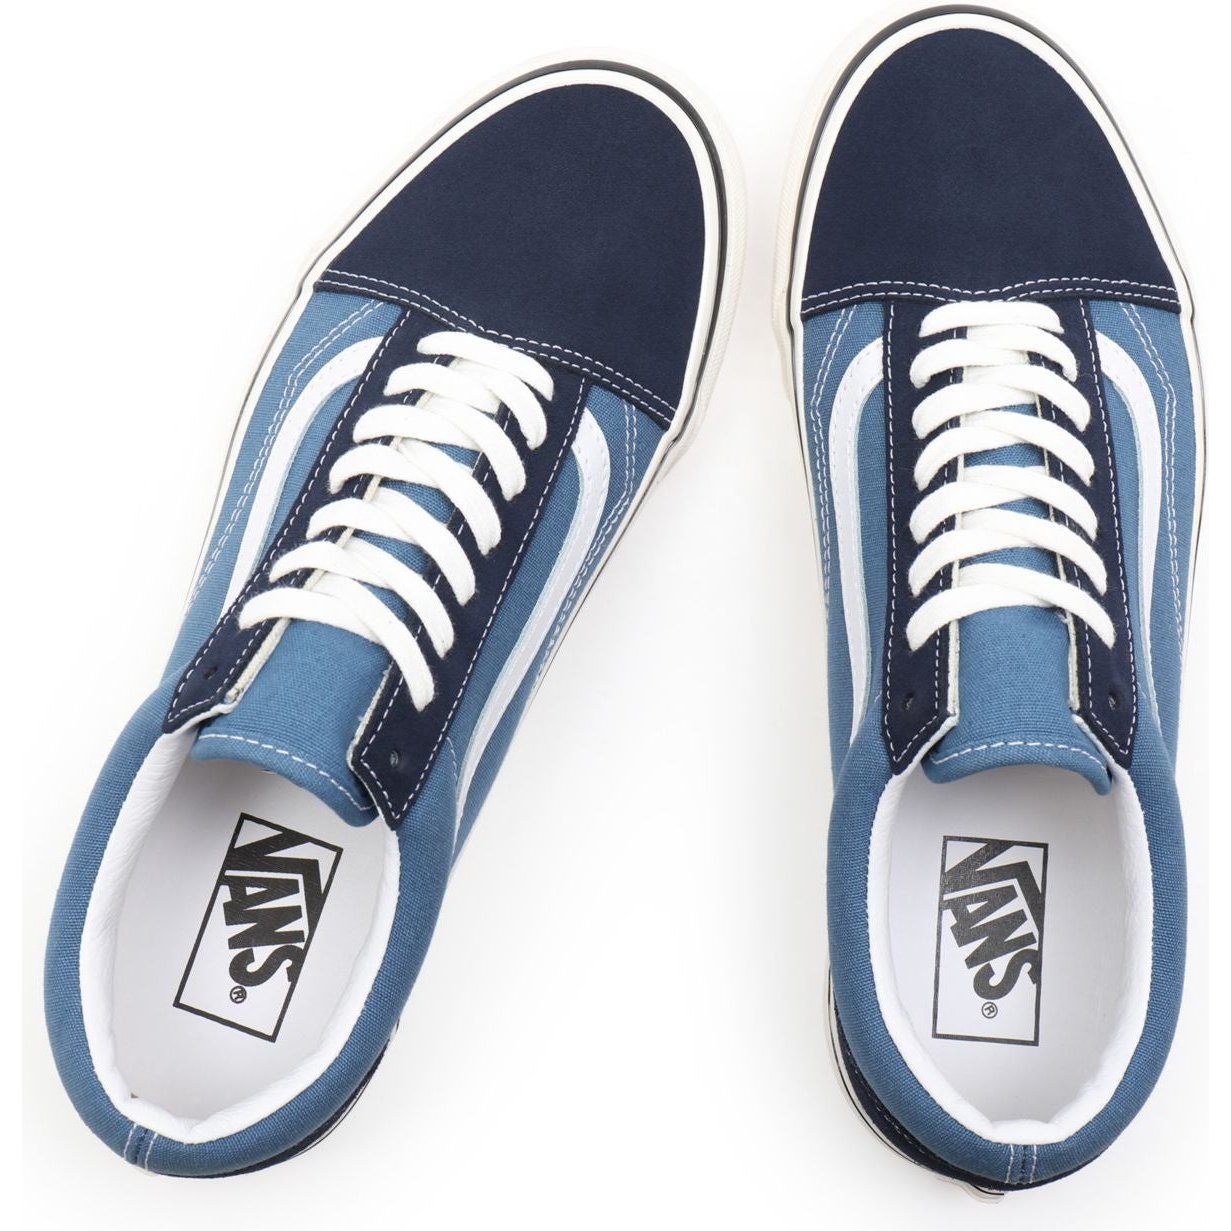 Anaheim Factory Old Skool 36 DX Shoes - Sporty Pro